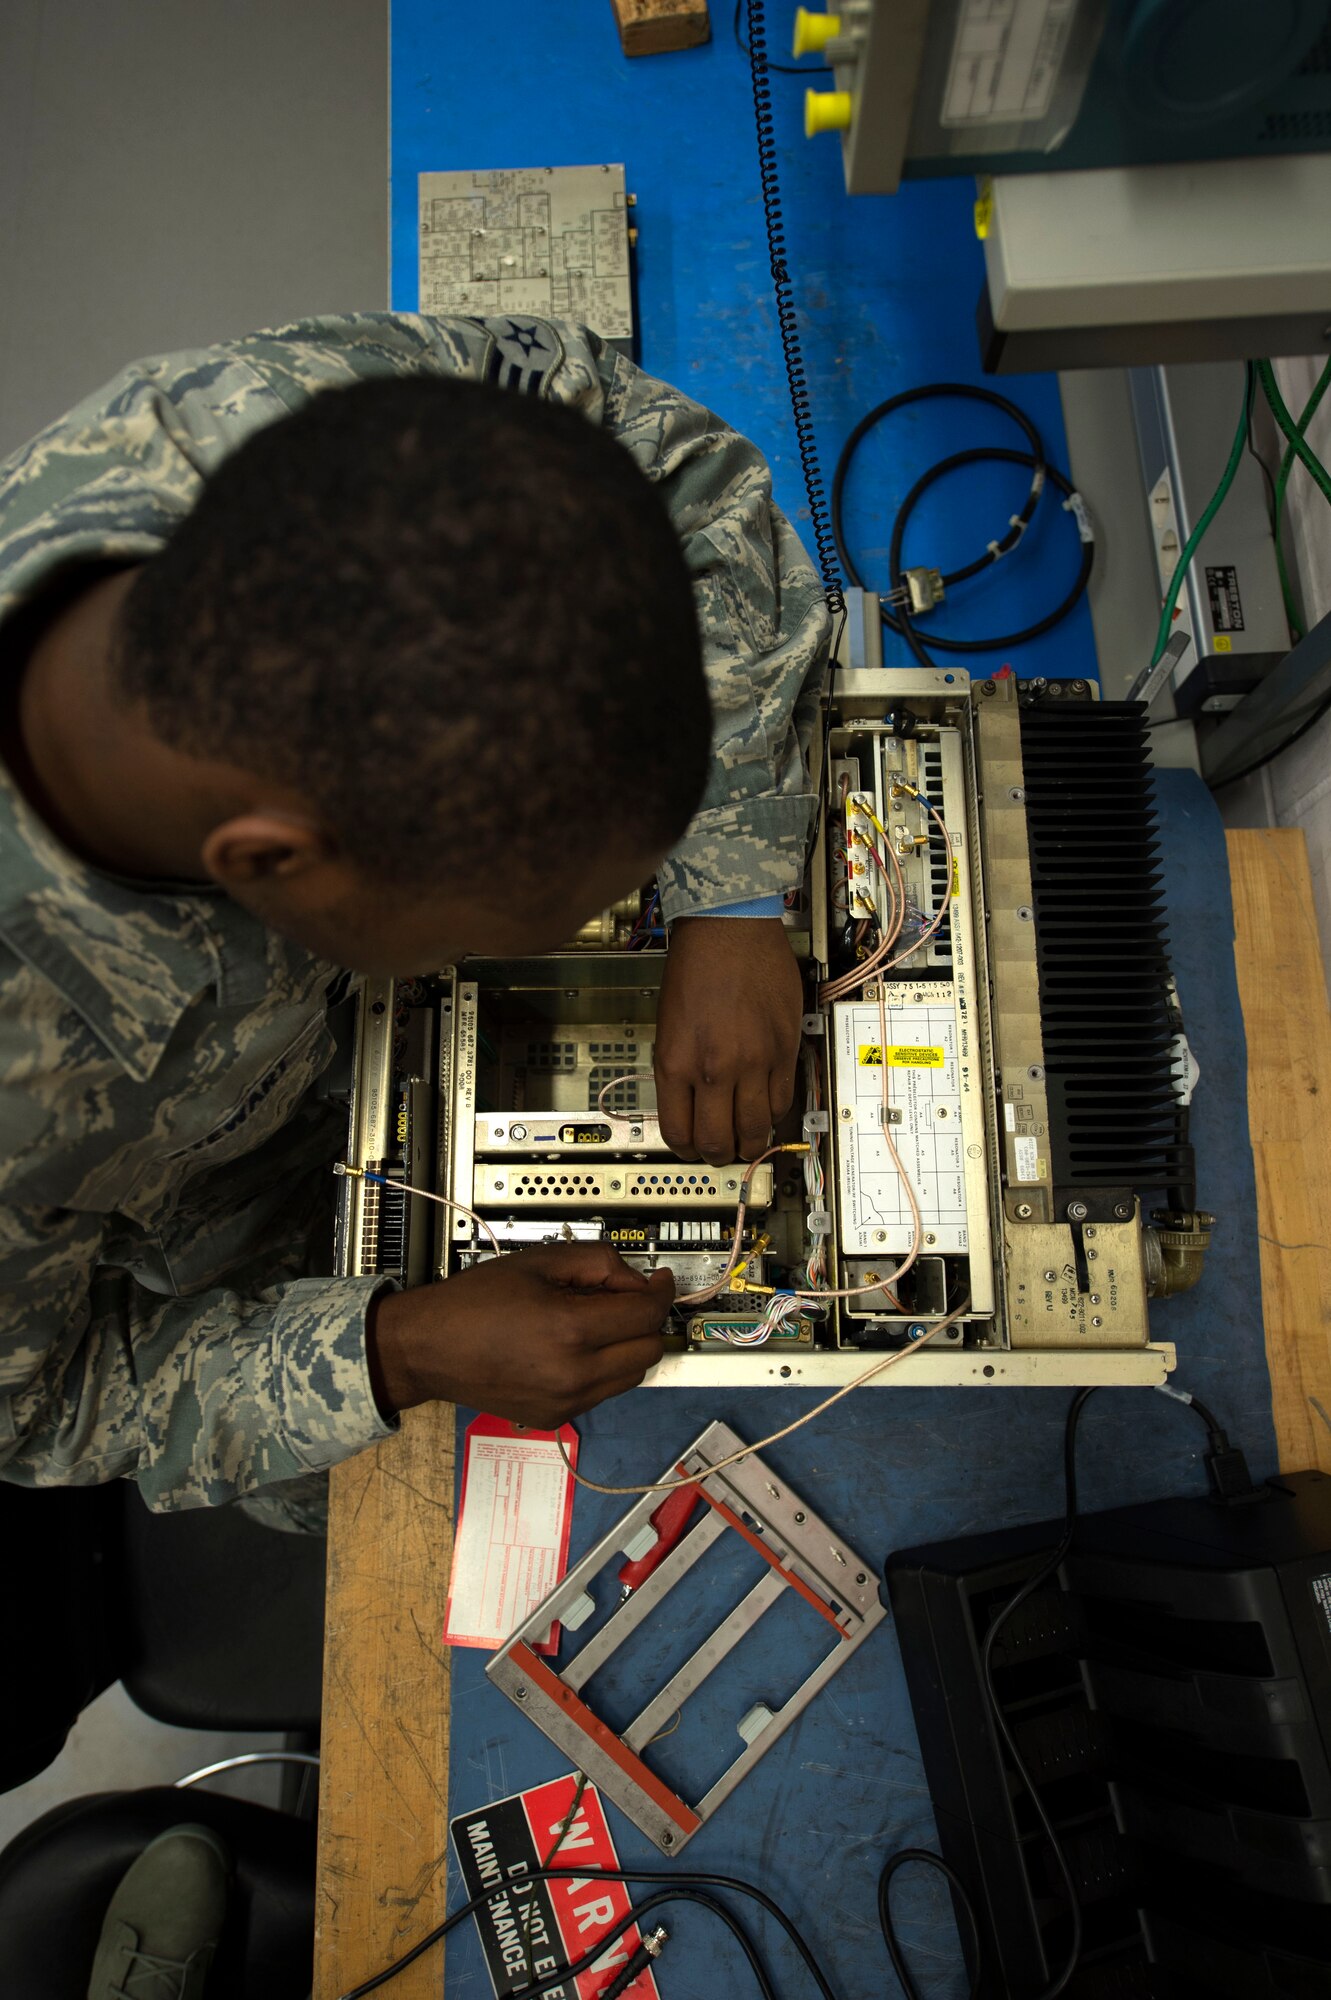 U.S. Air Force Senior Airman Jaquan Stewart, 606th Air Control Squadron radio frequency transmission technician from Folkston, Ga., disassembles a GRC-171 radio transceiver at Spangdahlem Air Base, Germany, June 30, 2014. While inspecting the equipment, Airmen clear out any dust and debris, and search for any abnormalities that would endanger the equipment or operators. (U.S. Air Force photo by Senior Airman Gustavo Castillo/Released)